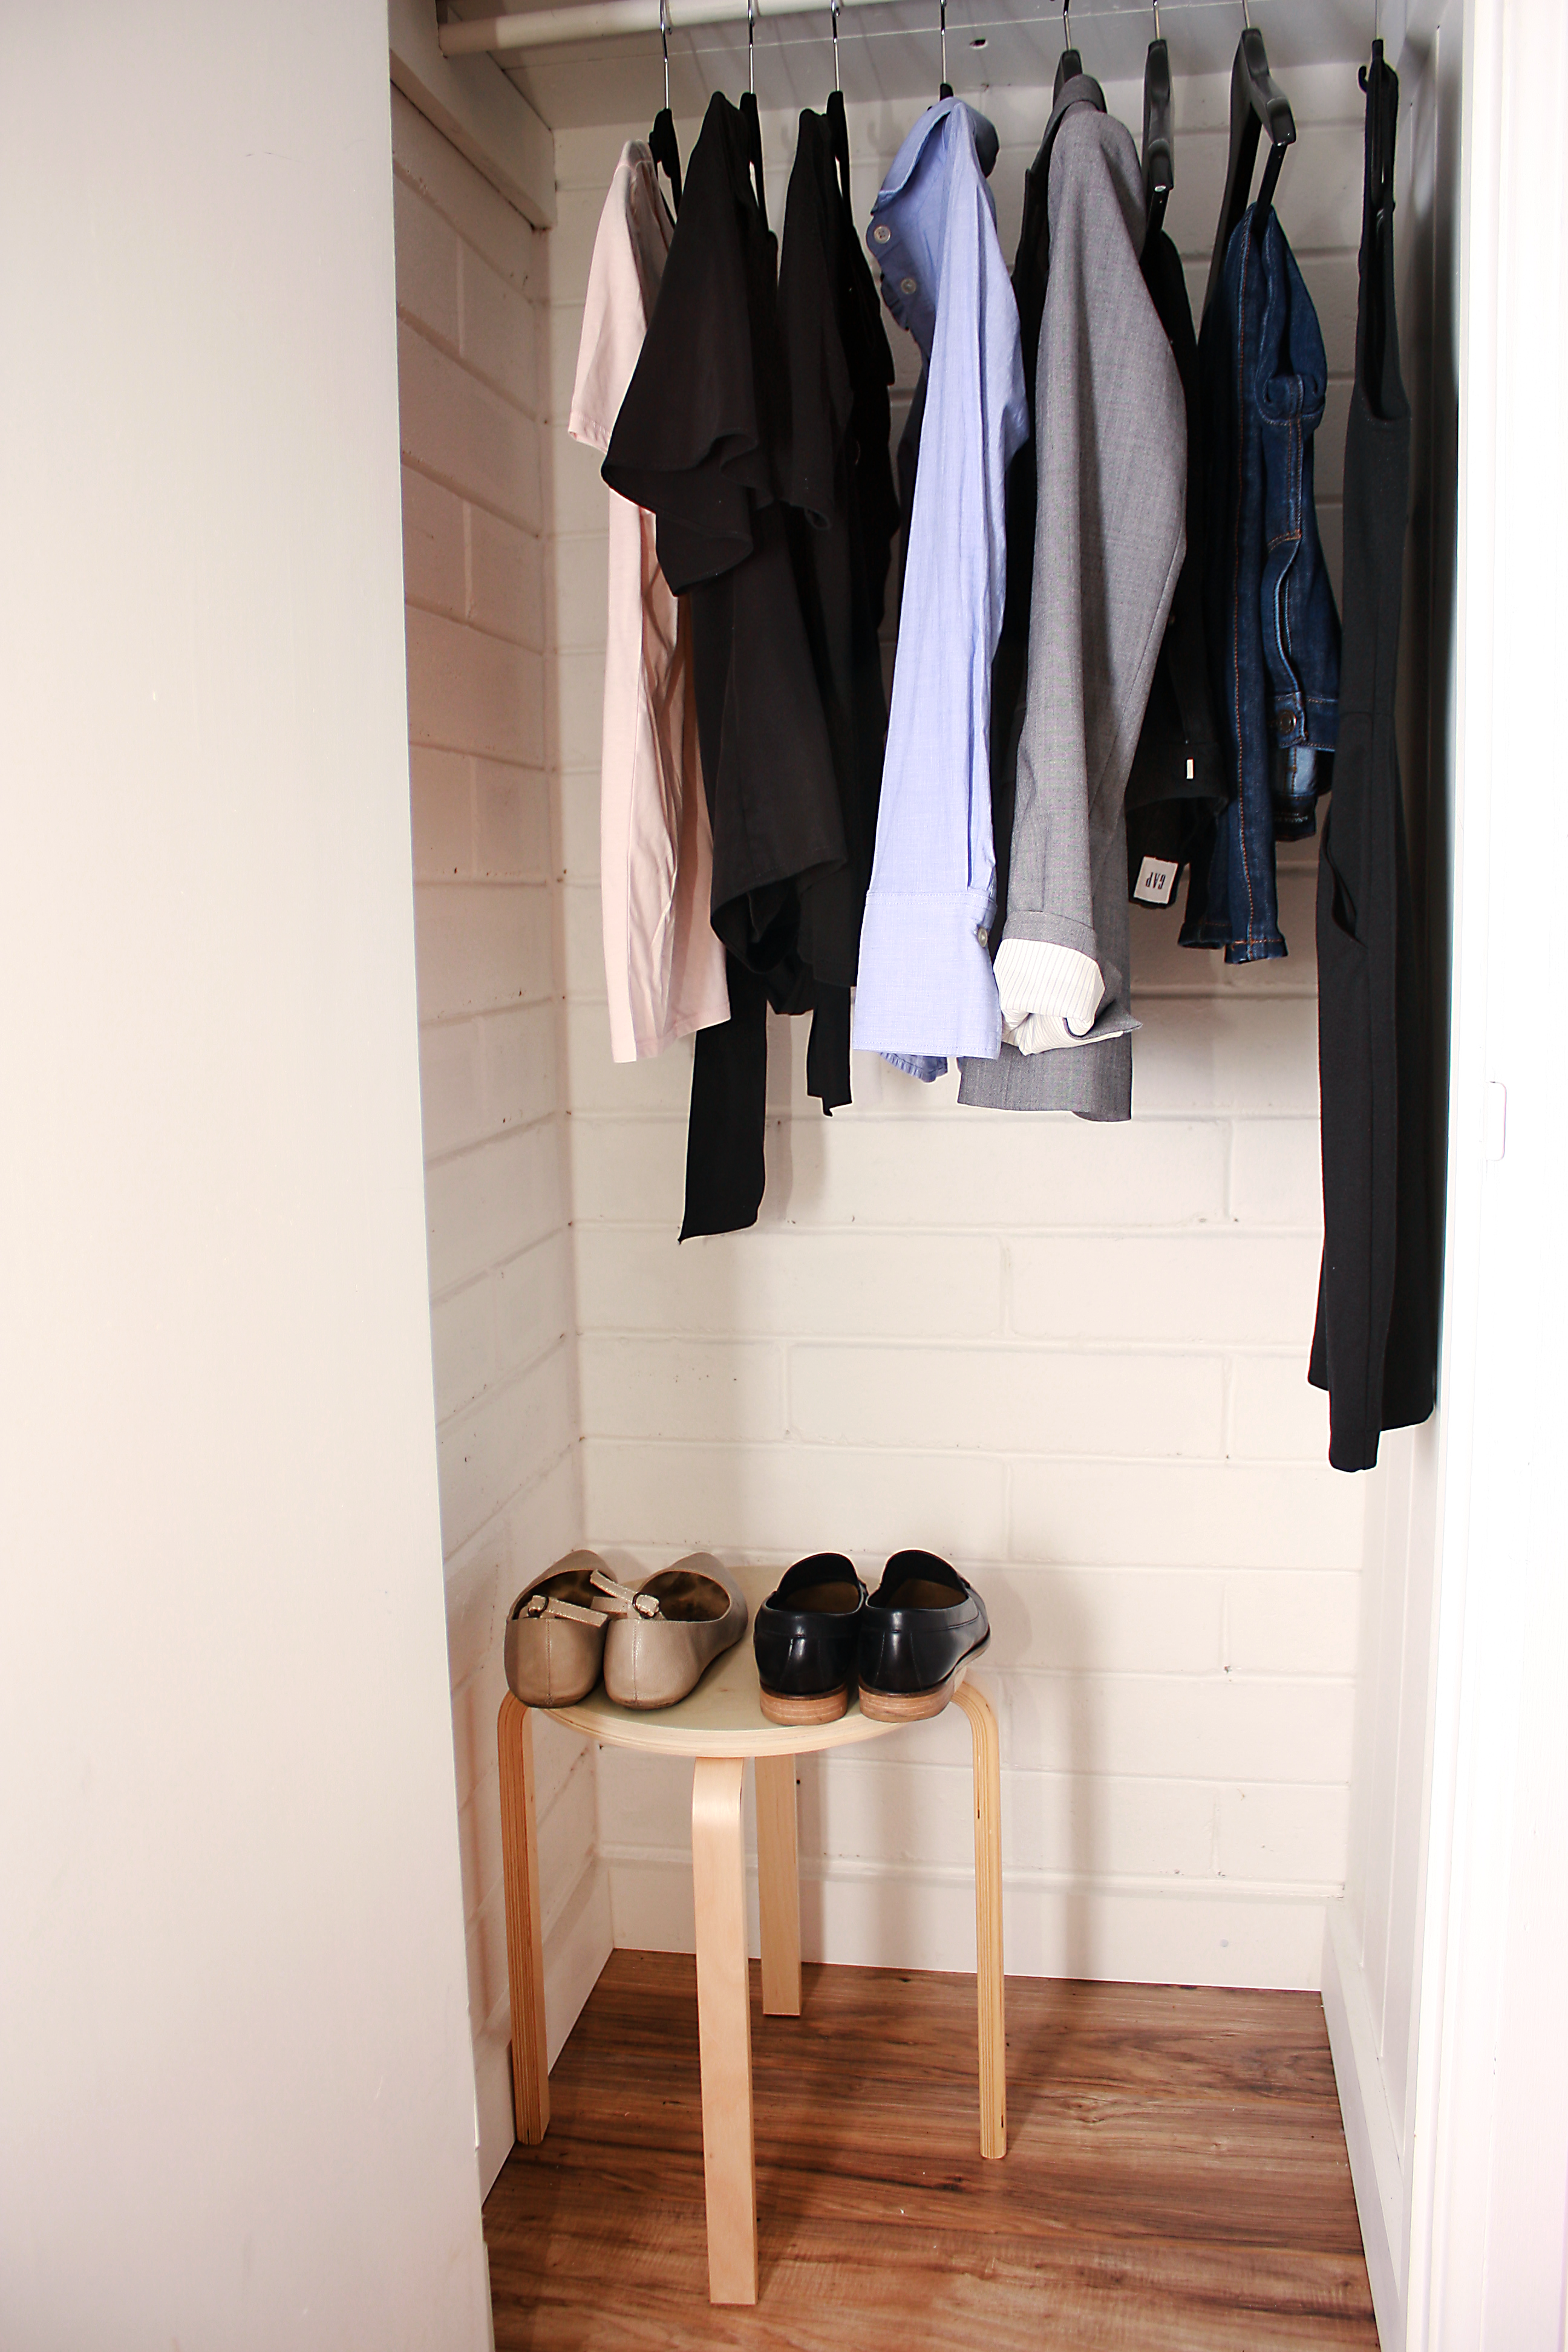 A closet containing ten garments and shoes